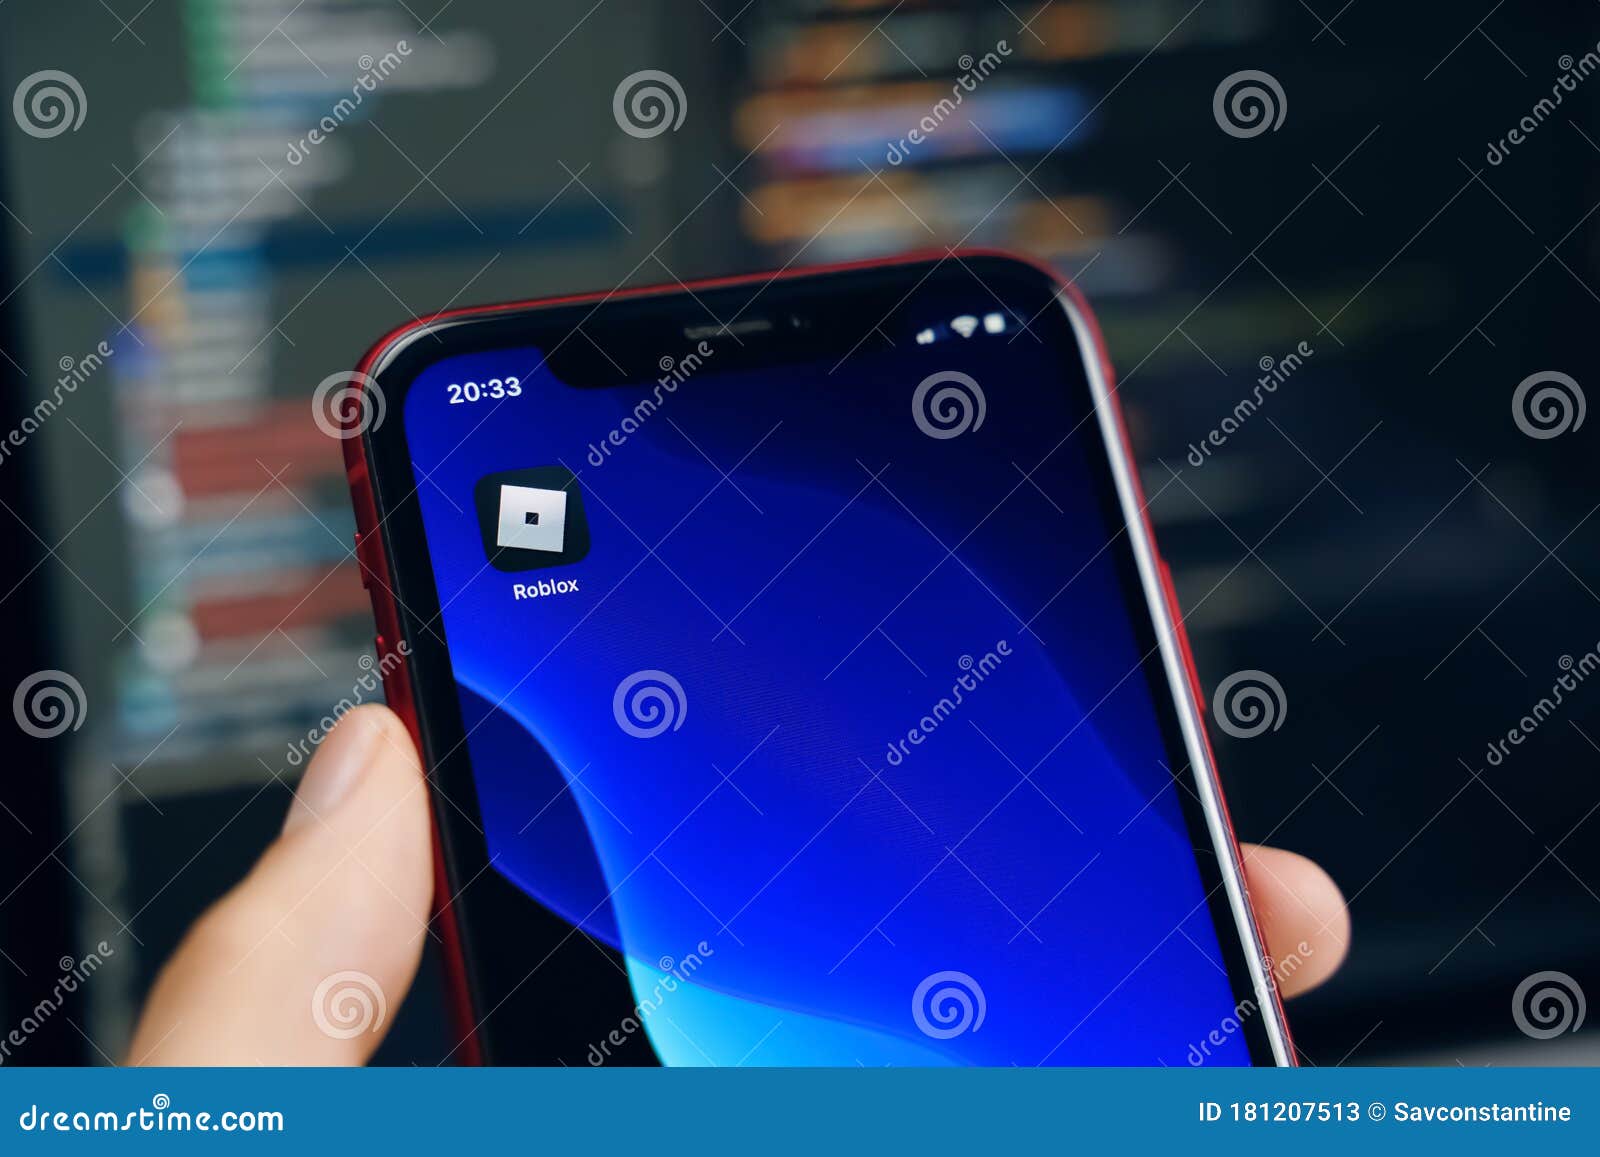 Roblox App Editorial Stock Photo Image Of Game Mobile 181207513 - roblox phone code